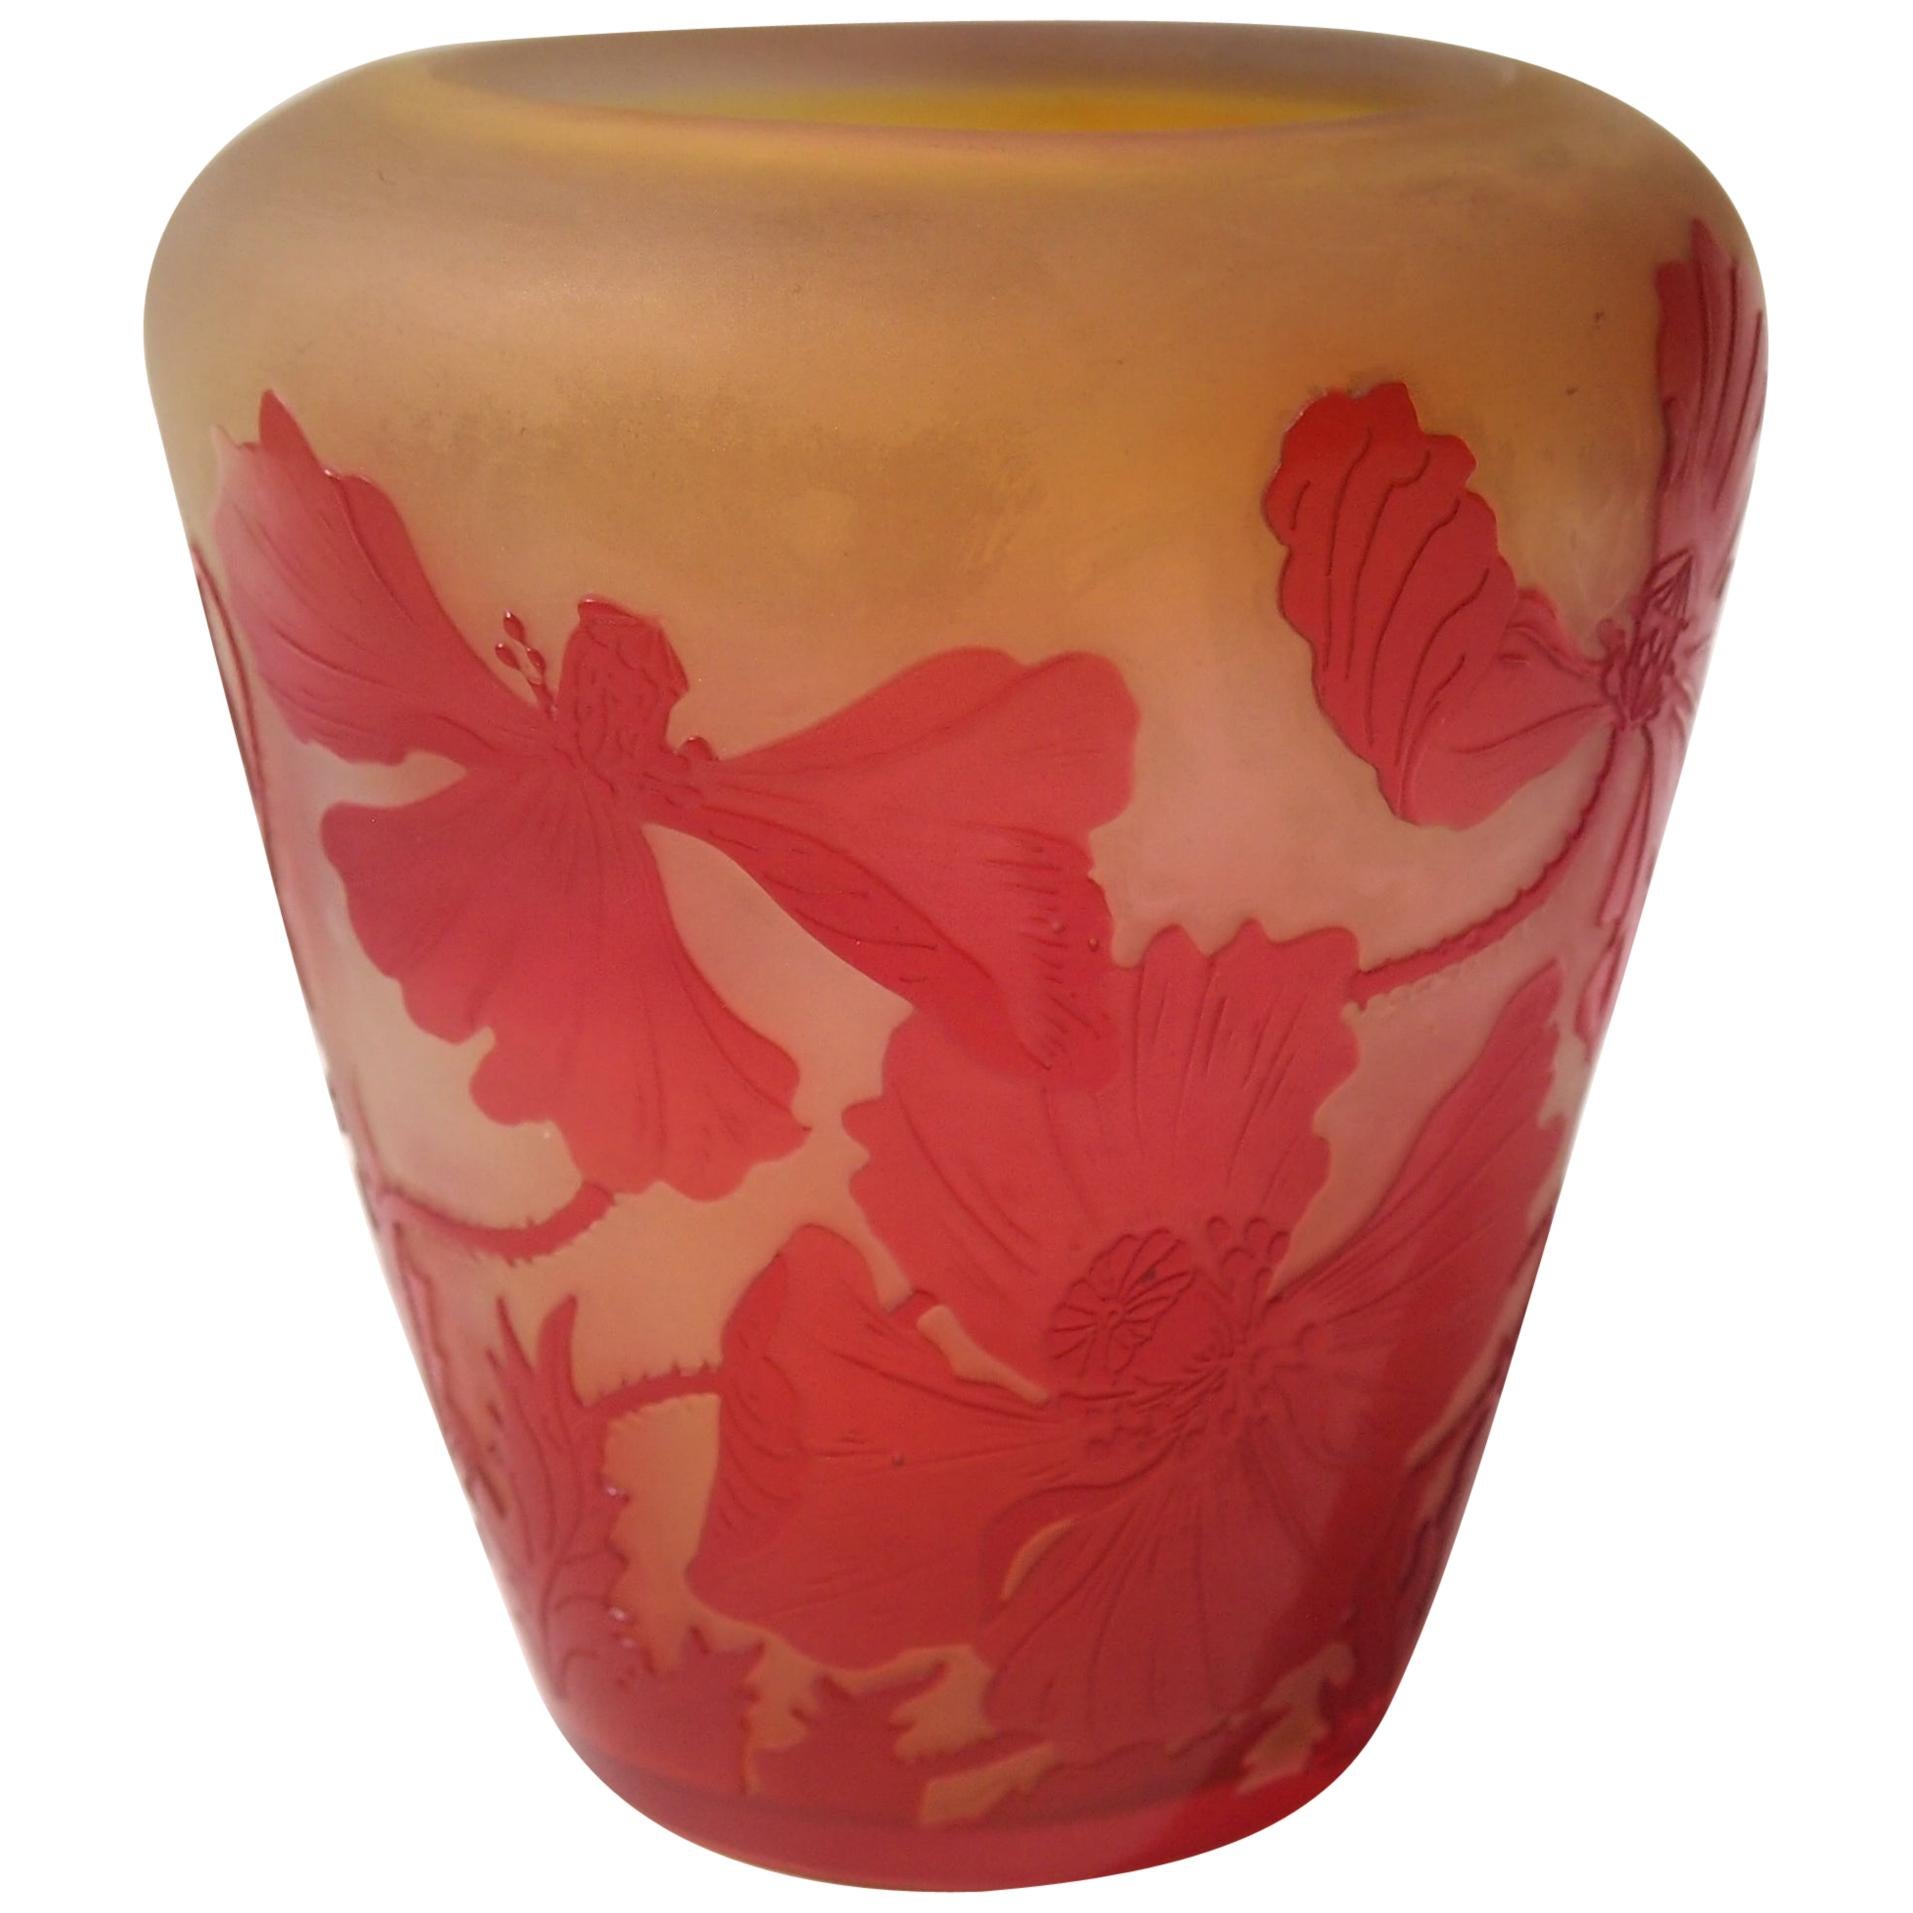 French Art Nouveau Red and Opal Orange Signed Emile Galle Cameo Glass Vase For Sale